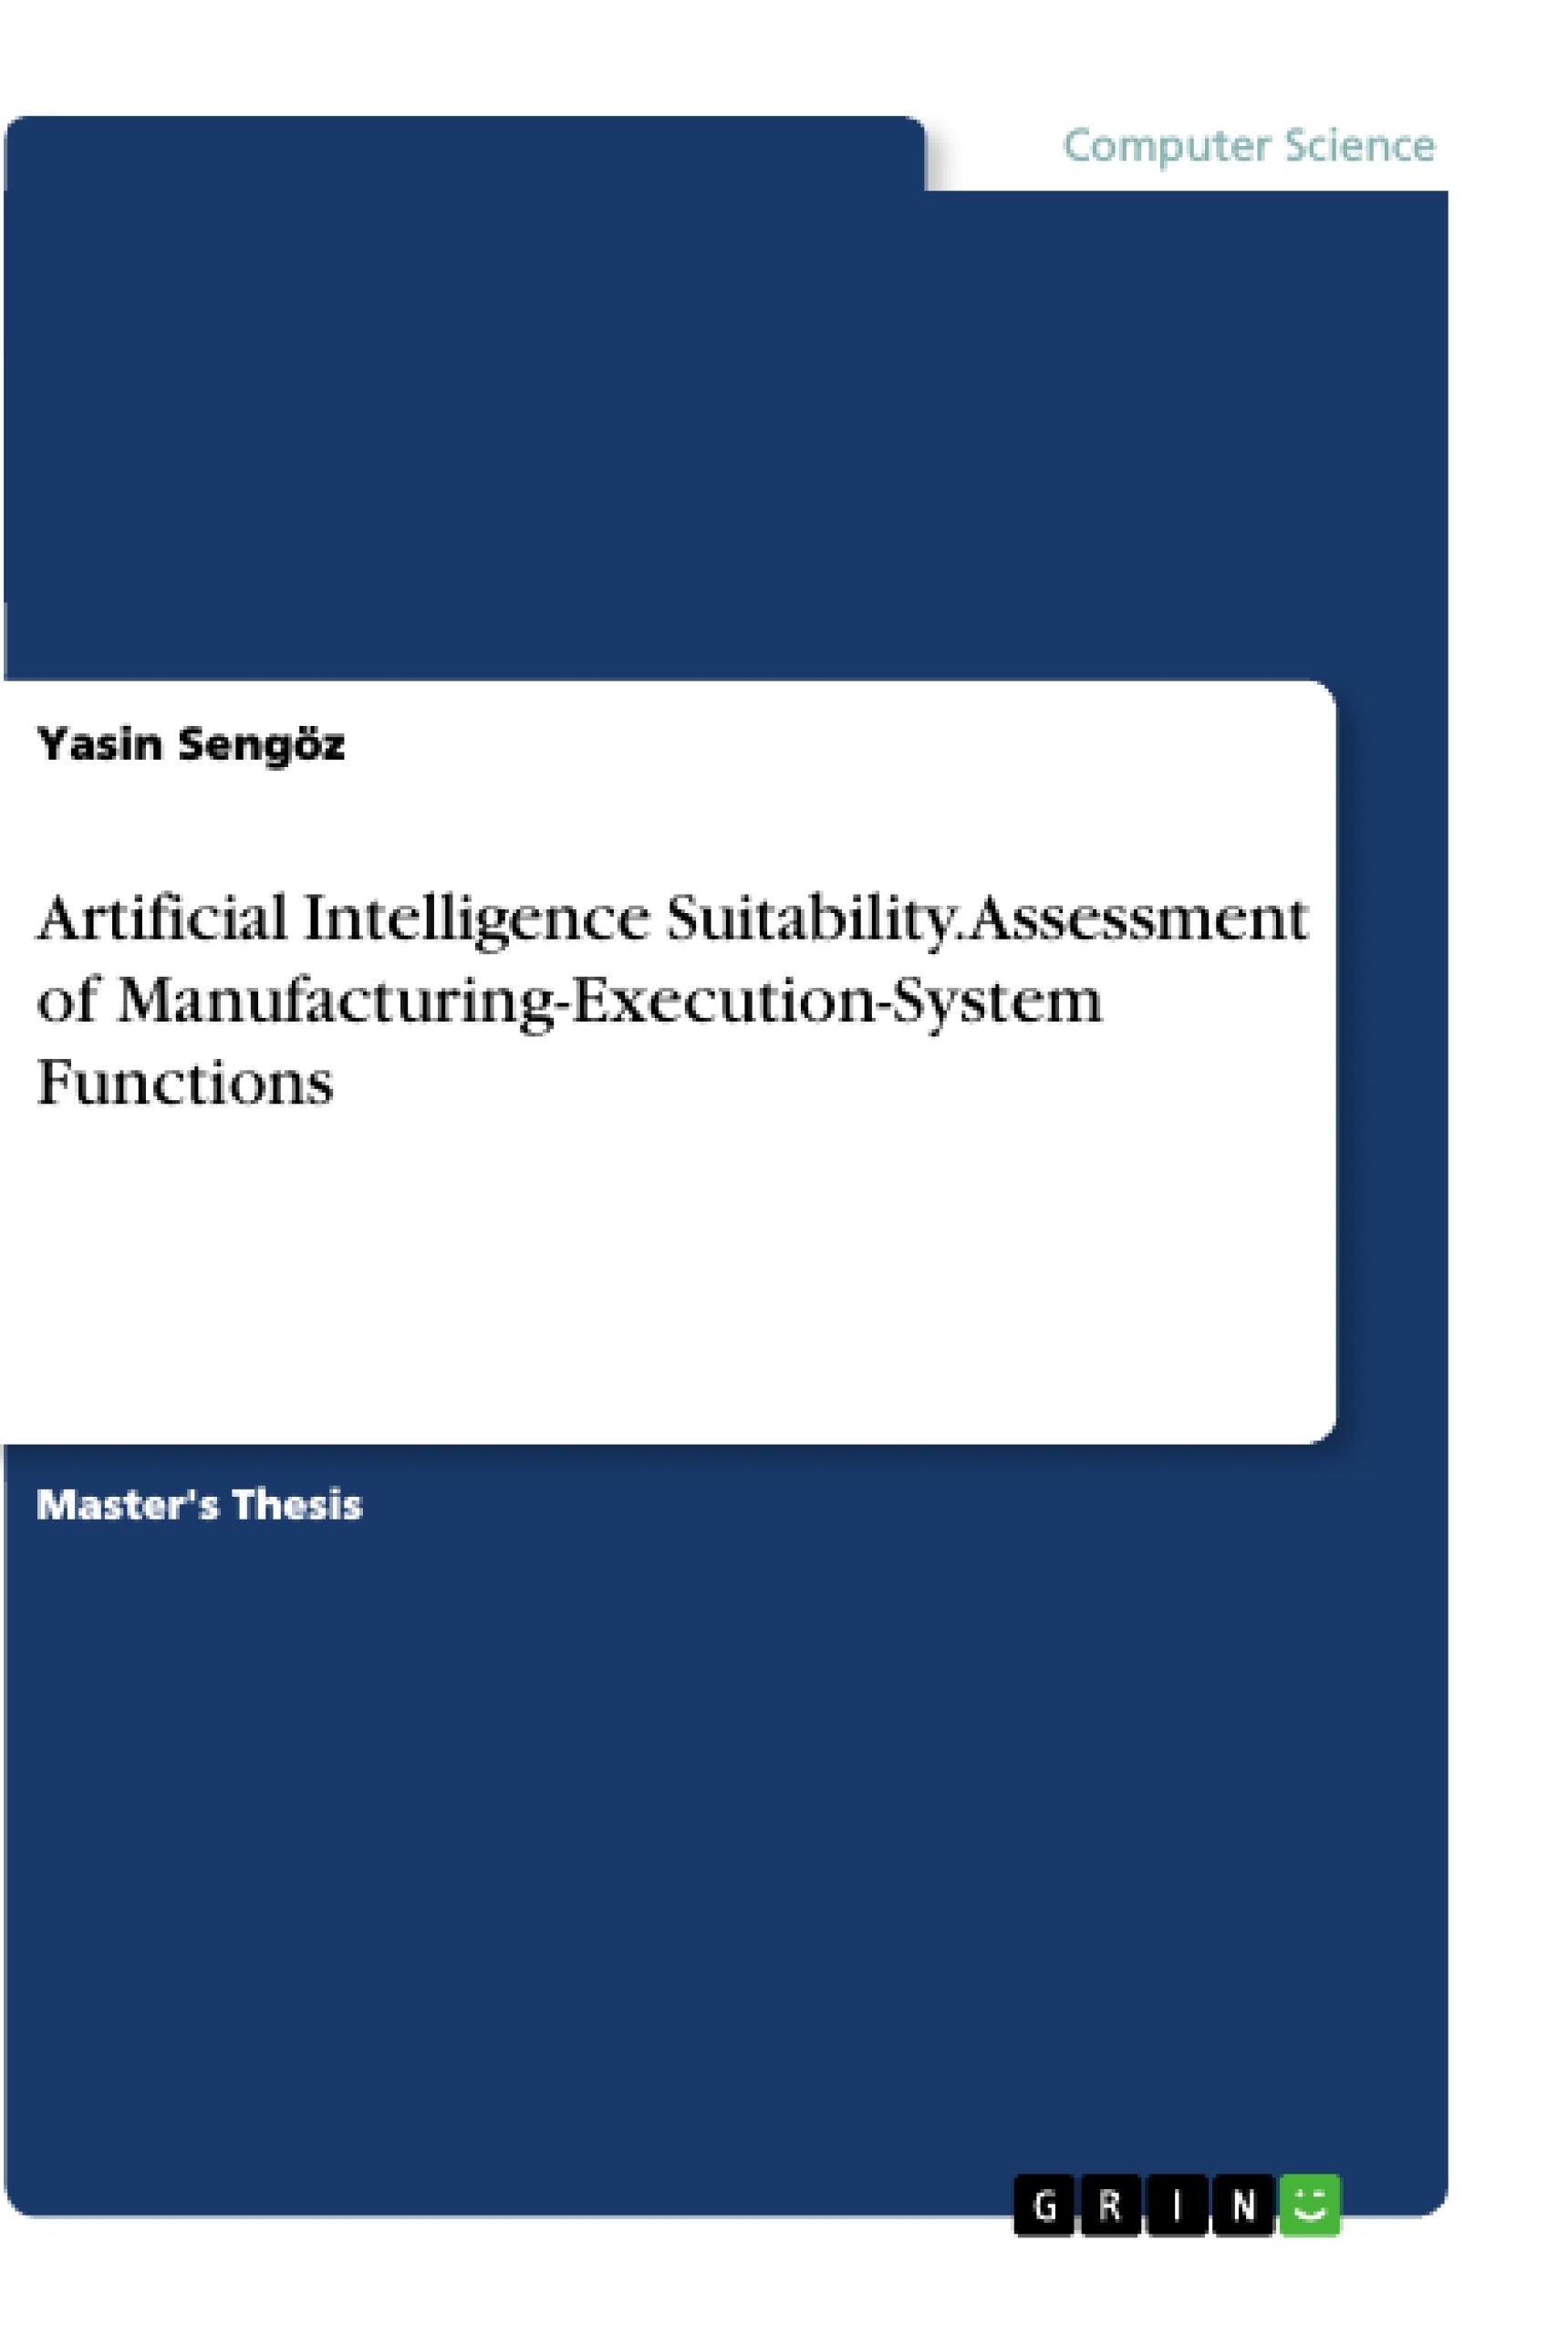 Titre: Artificial Intelligence Suitability. Assessment of Manufacturing-Execution-System Functions